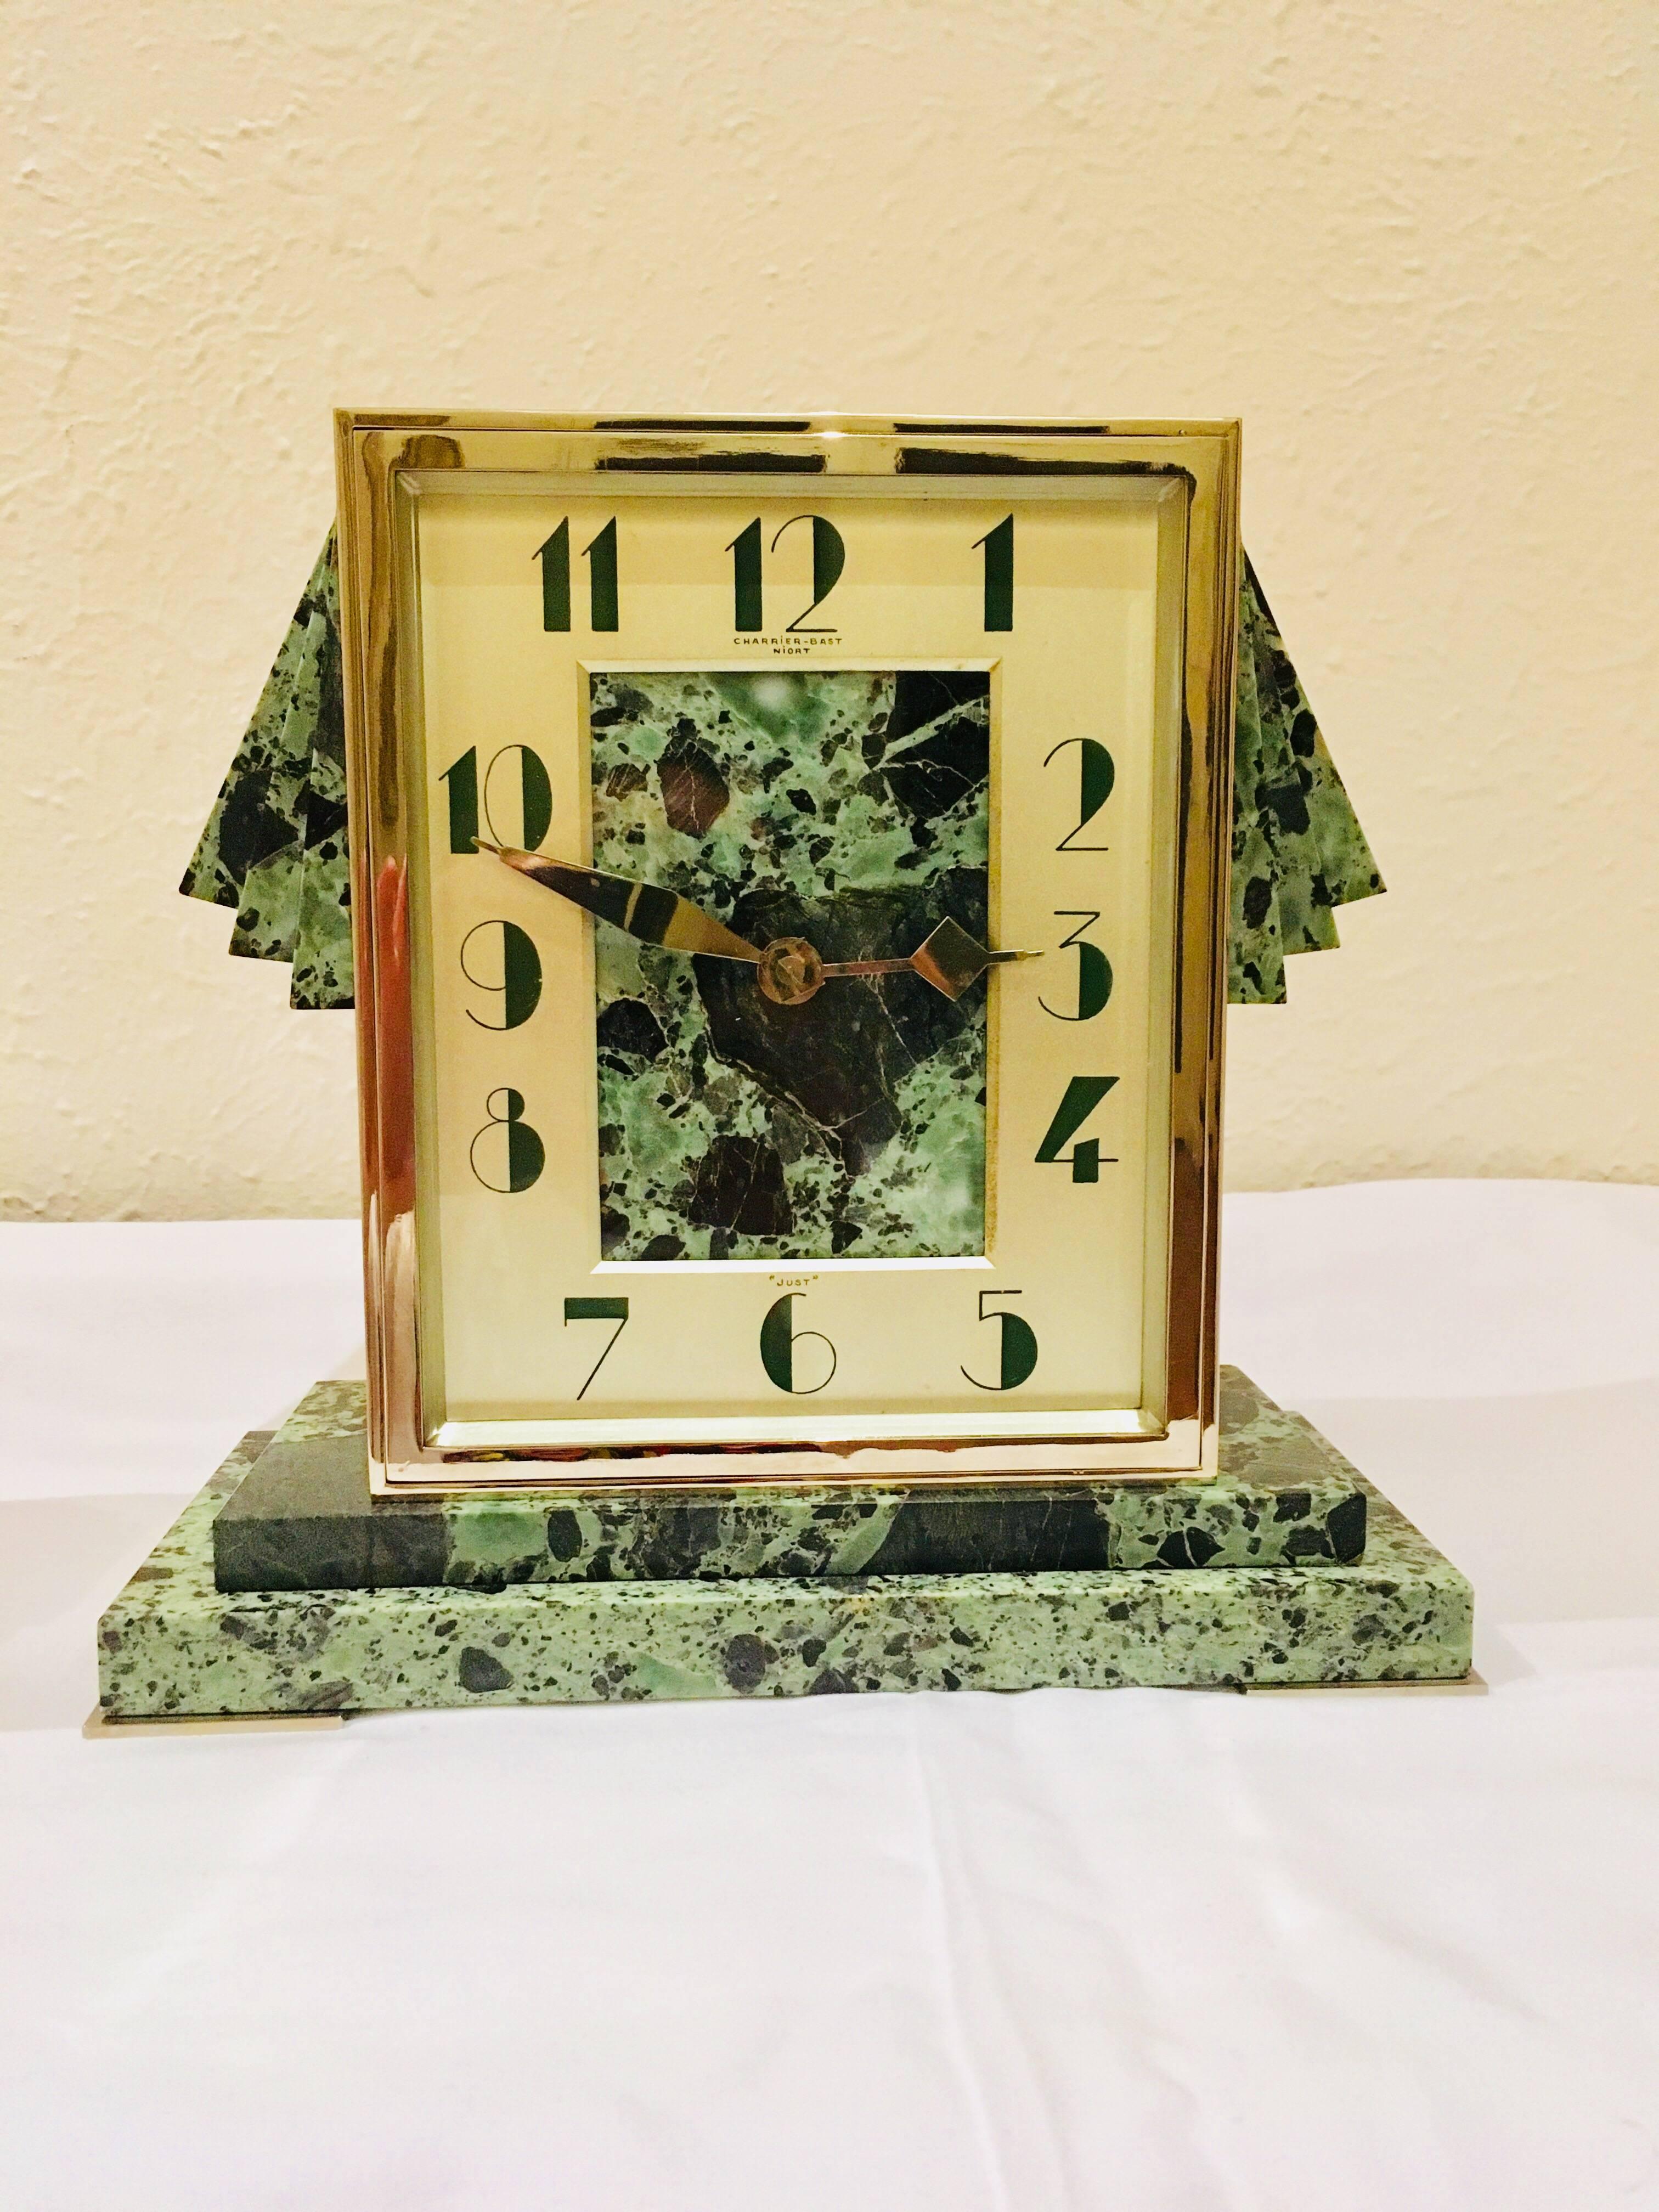 French Art Deco 'Just' marble mantel clock with garnitures, 1930s.

Marble and nickel chrome-plated clock set. Fully restored movement- keeps perfect time!

This is truly one for the Art Deco purist- we doubt you will find a nicer example of